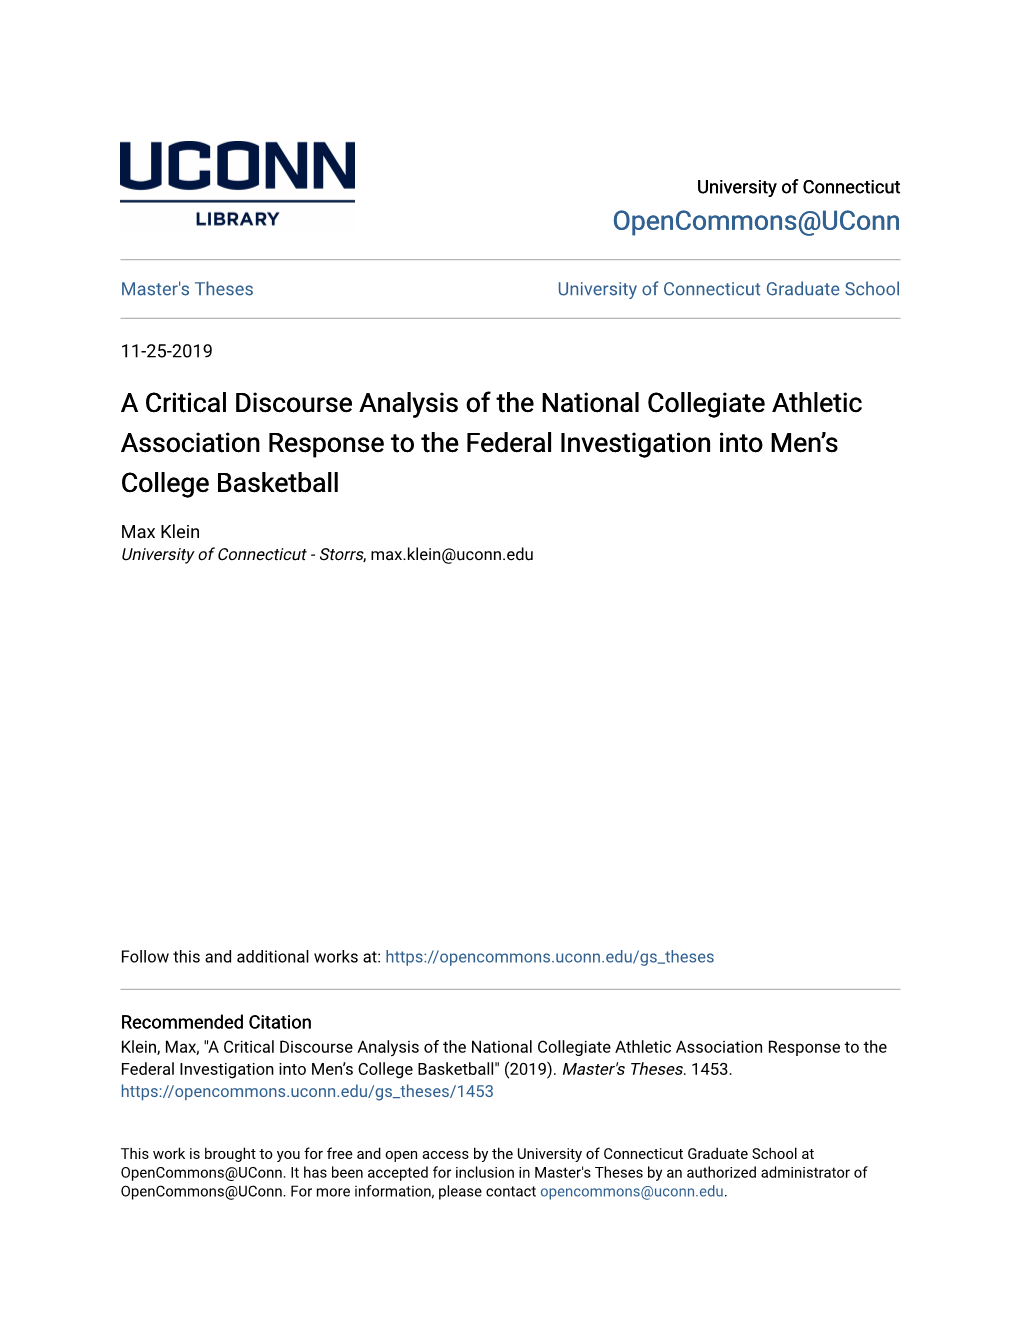 A Critical Discourse Analysis of the National Collegiate Athletic Association Response to the Federal Investigation Into Men’S College Basketball